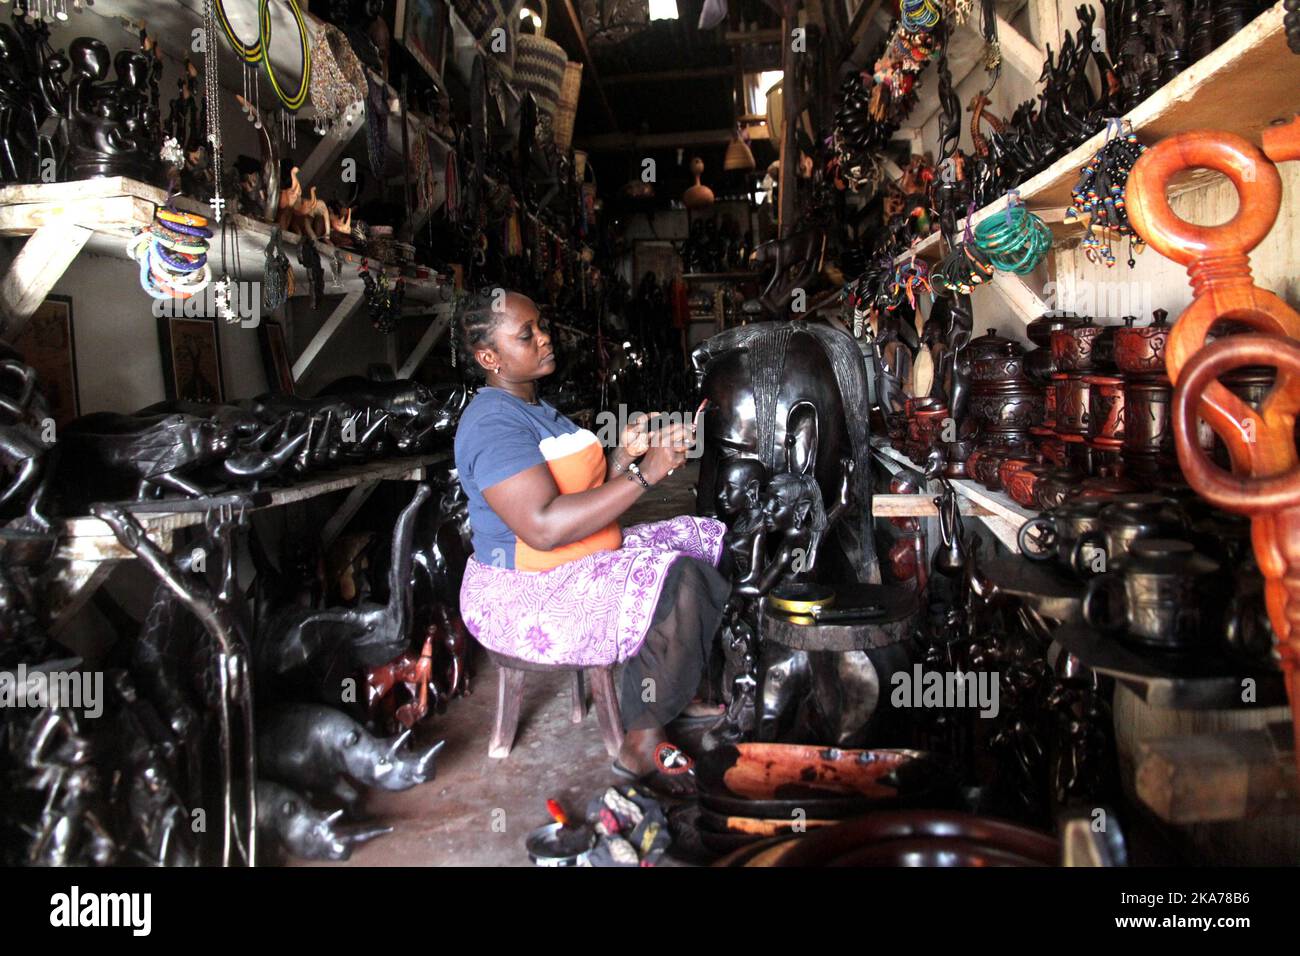 (200707) -- DAR ES SALAAM, July 7, 2020 (Xinhua) -- A shop owner polishes woodcarvings at her empty shop in Mwenge Woodcarvers Market in Dar es Salaam, Tanzania, July 6, 2020. Due to the outbreak of COVID-19, the city's artworks markets once popular among foreign tourists are nearly empty now. (Xinhua) Stock Photo